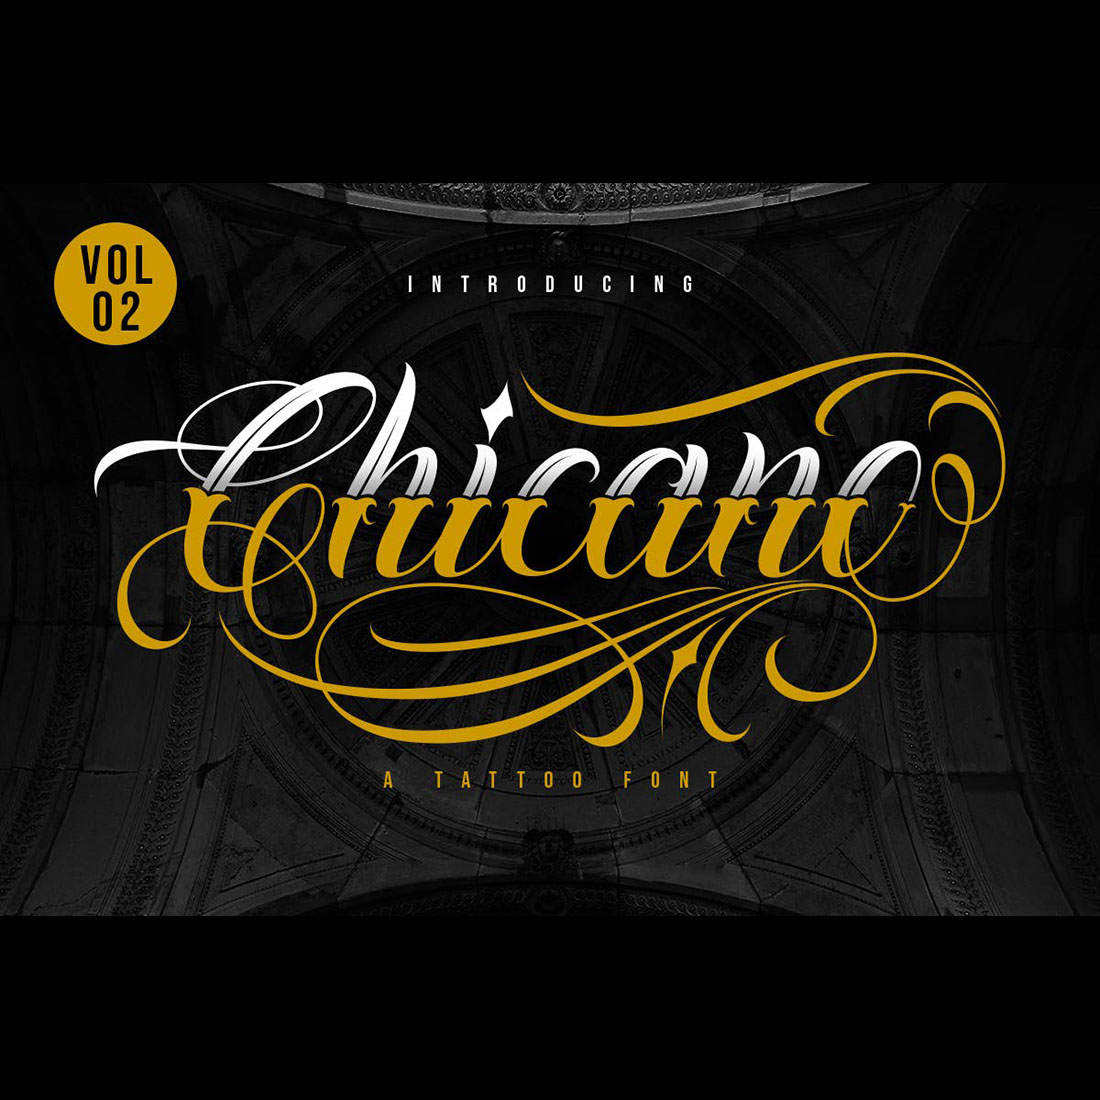 Chicano Font V2 cover image.